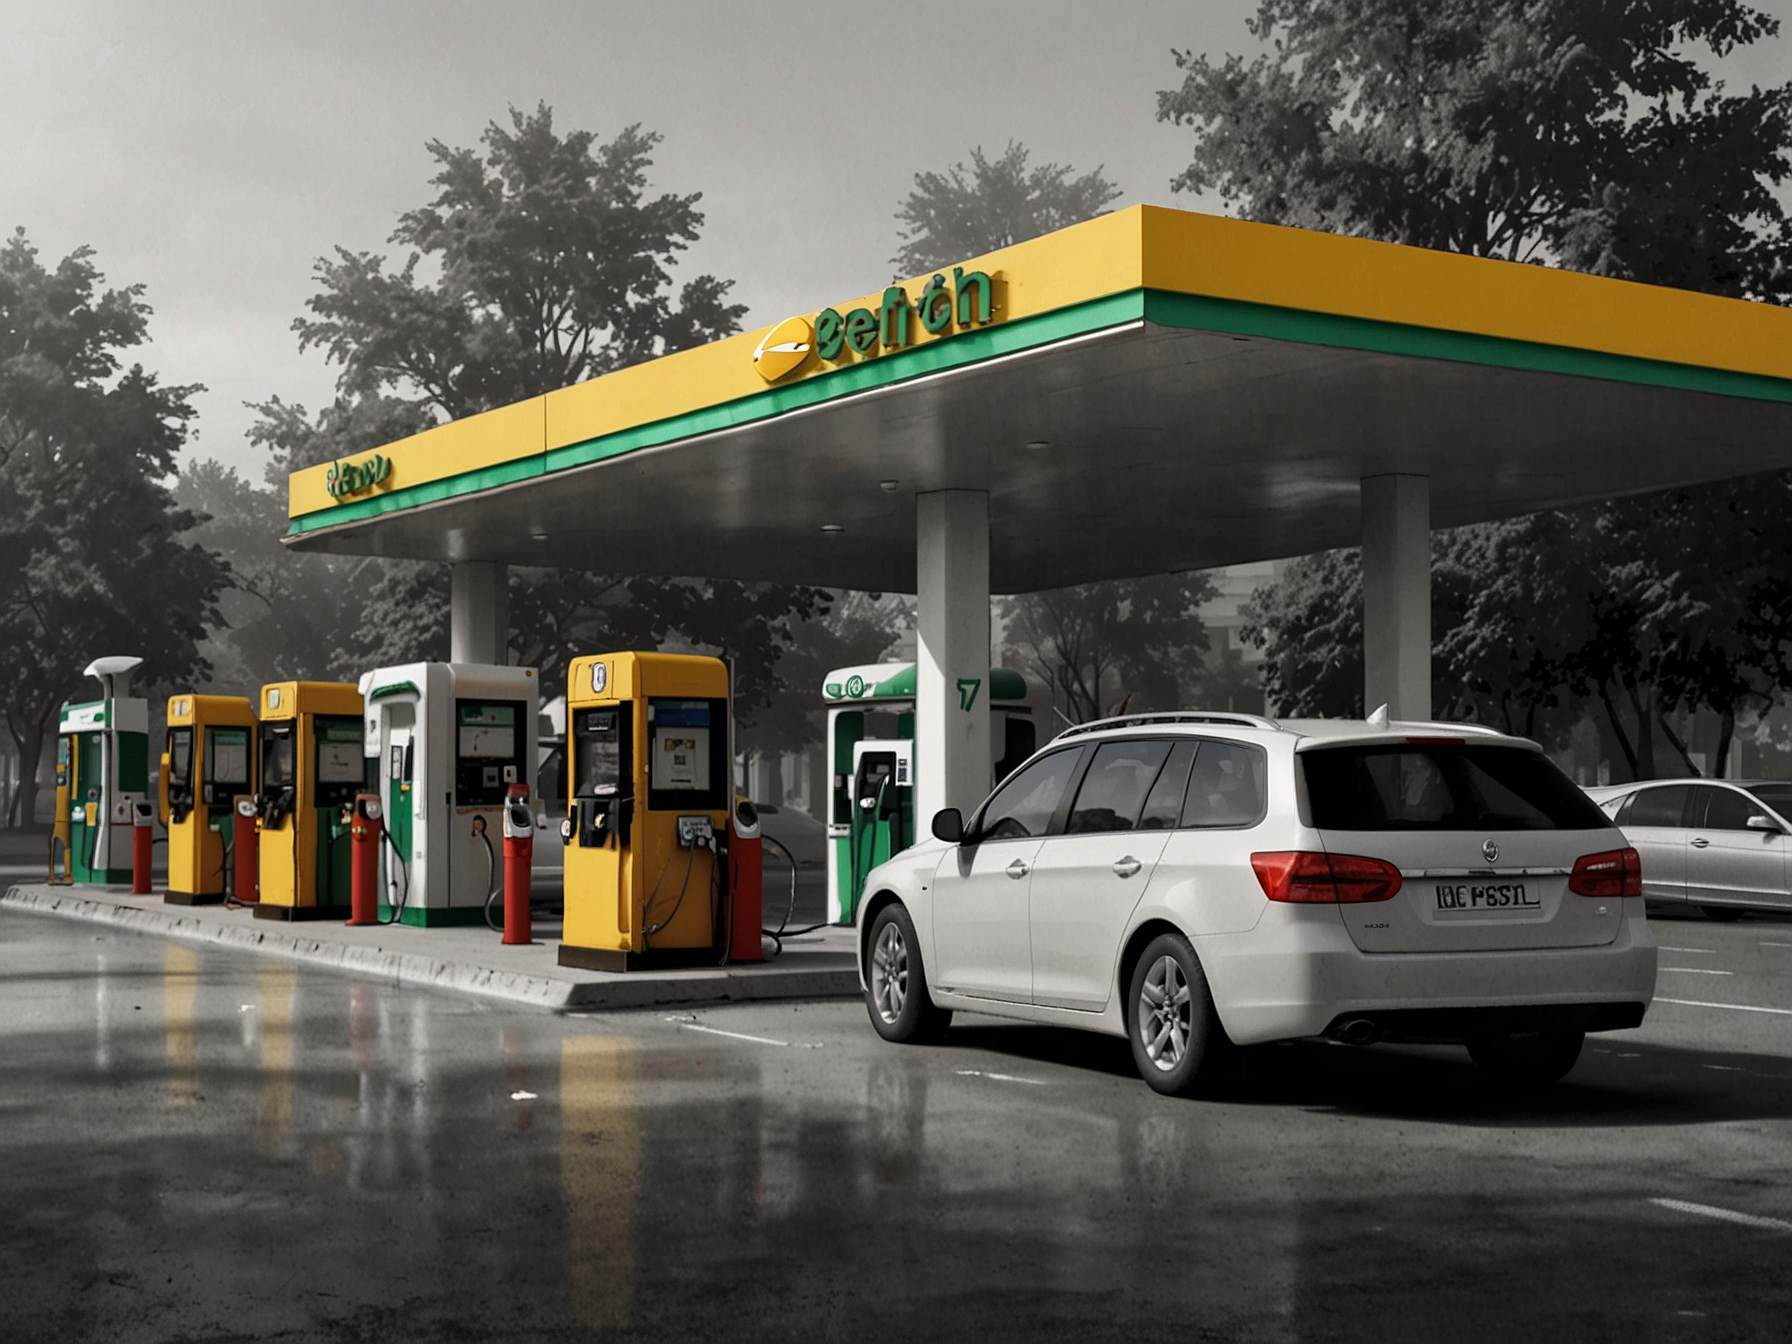 A CNG filling station with a line of vehicles including taxis and private cars, illustrating the increased fuel costs for both public and private vehicle owners due to the revised CNG prices.